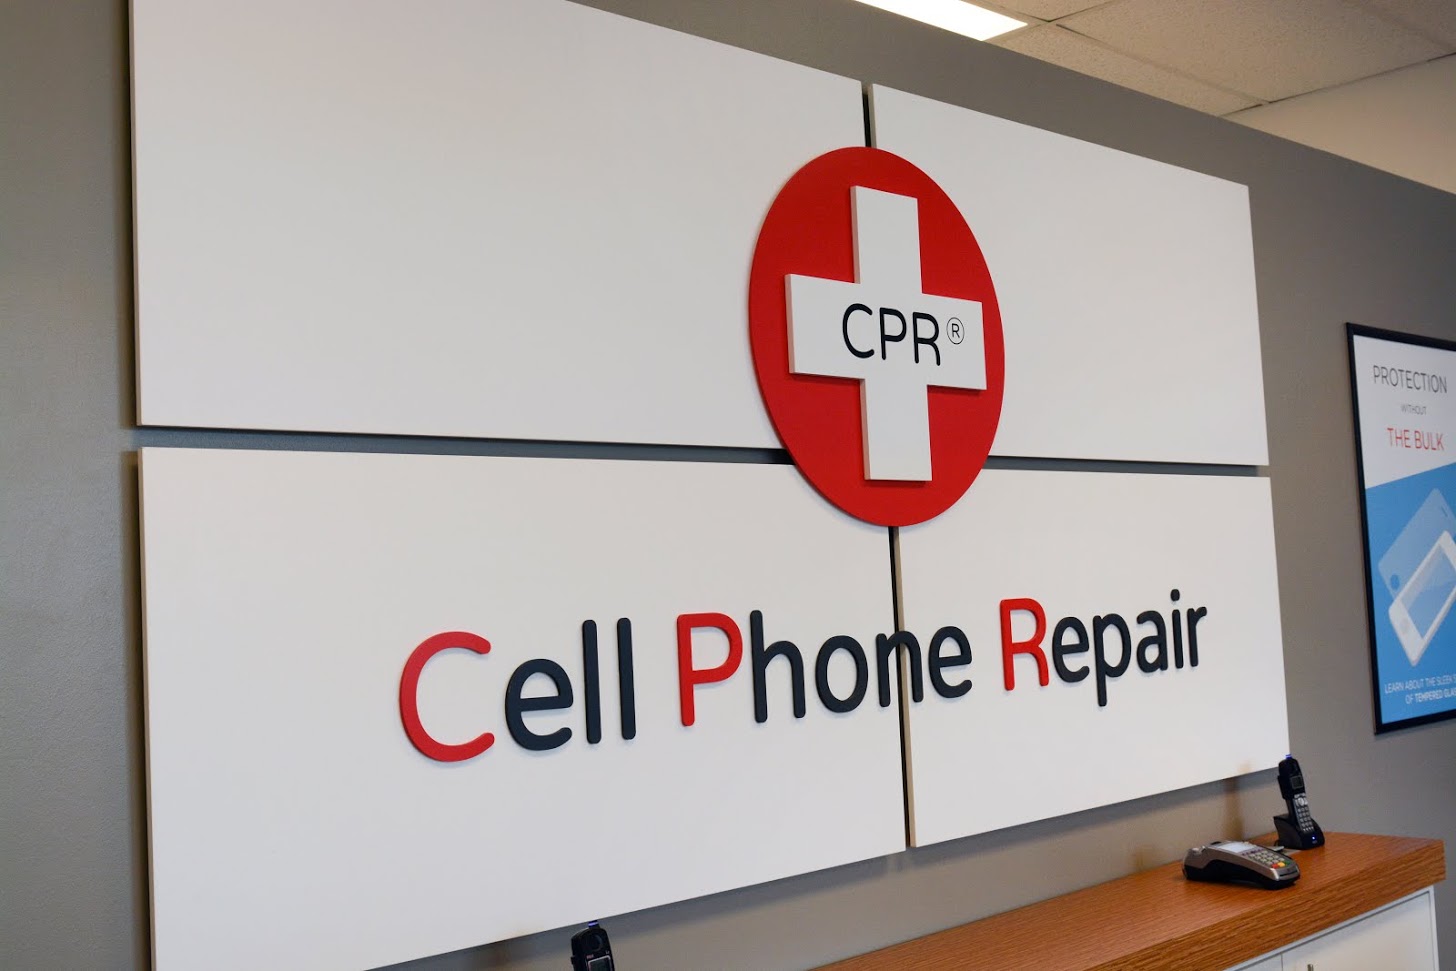 CPR Cell Phone Repair, Friday, May 31, 2019, Press release picture